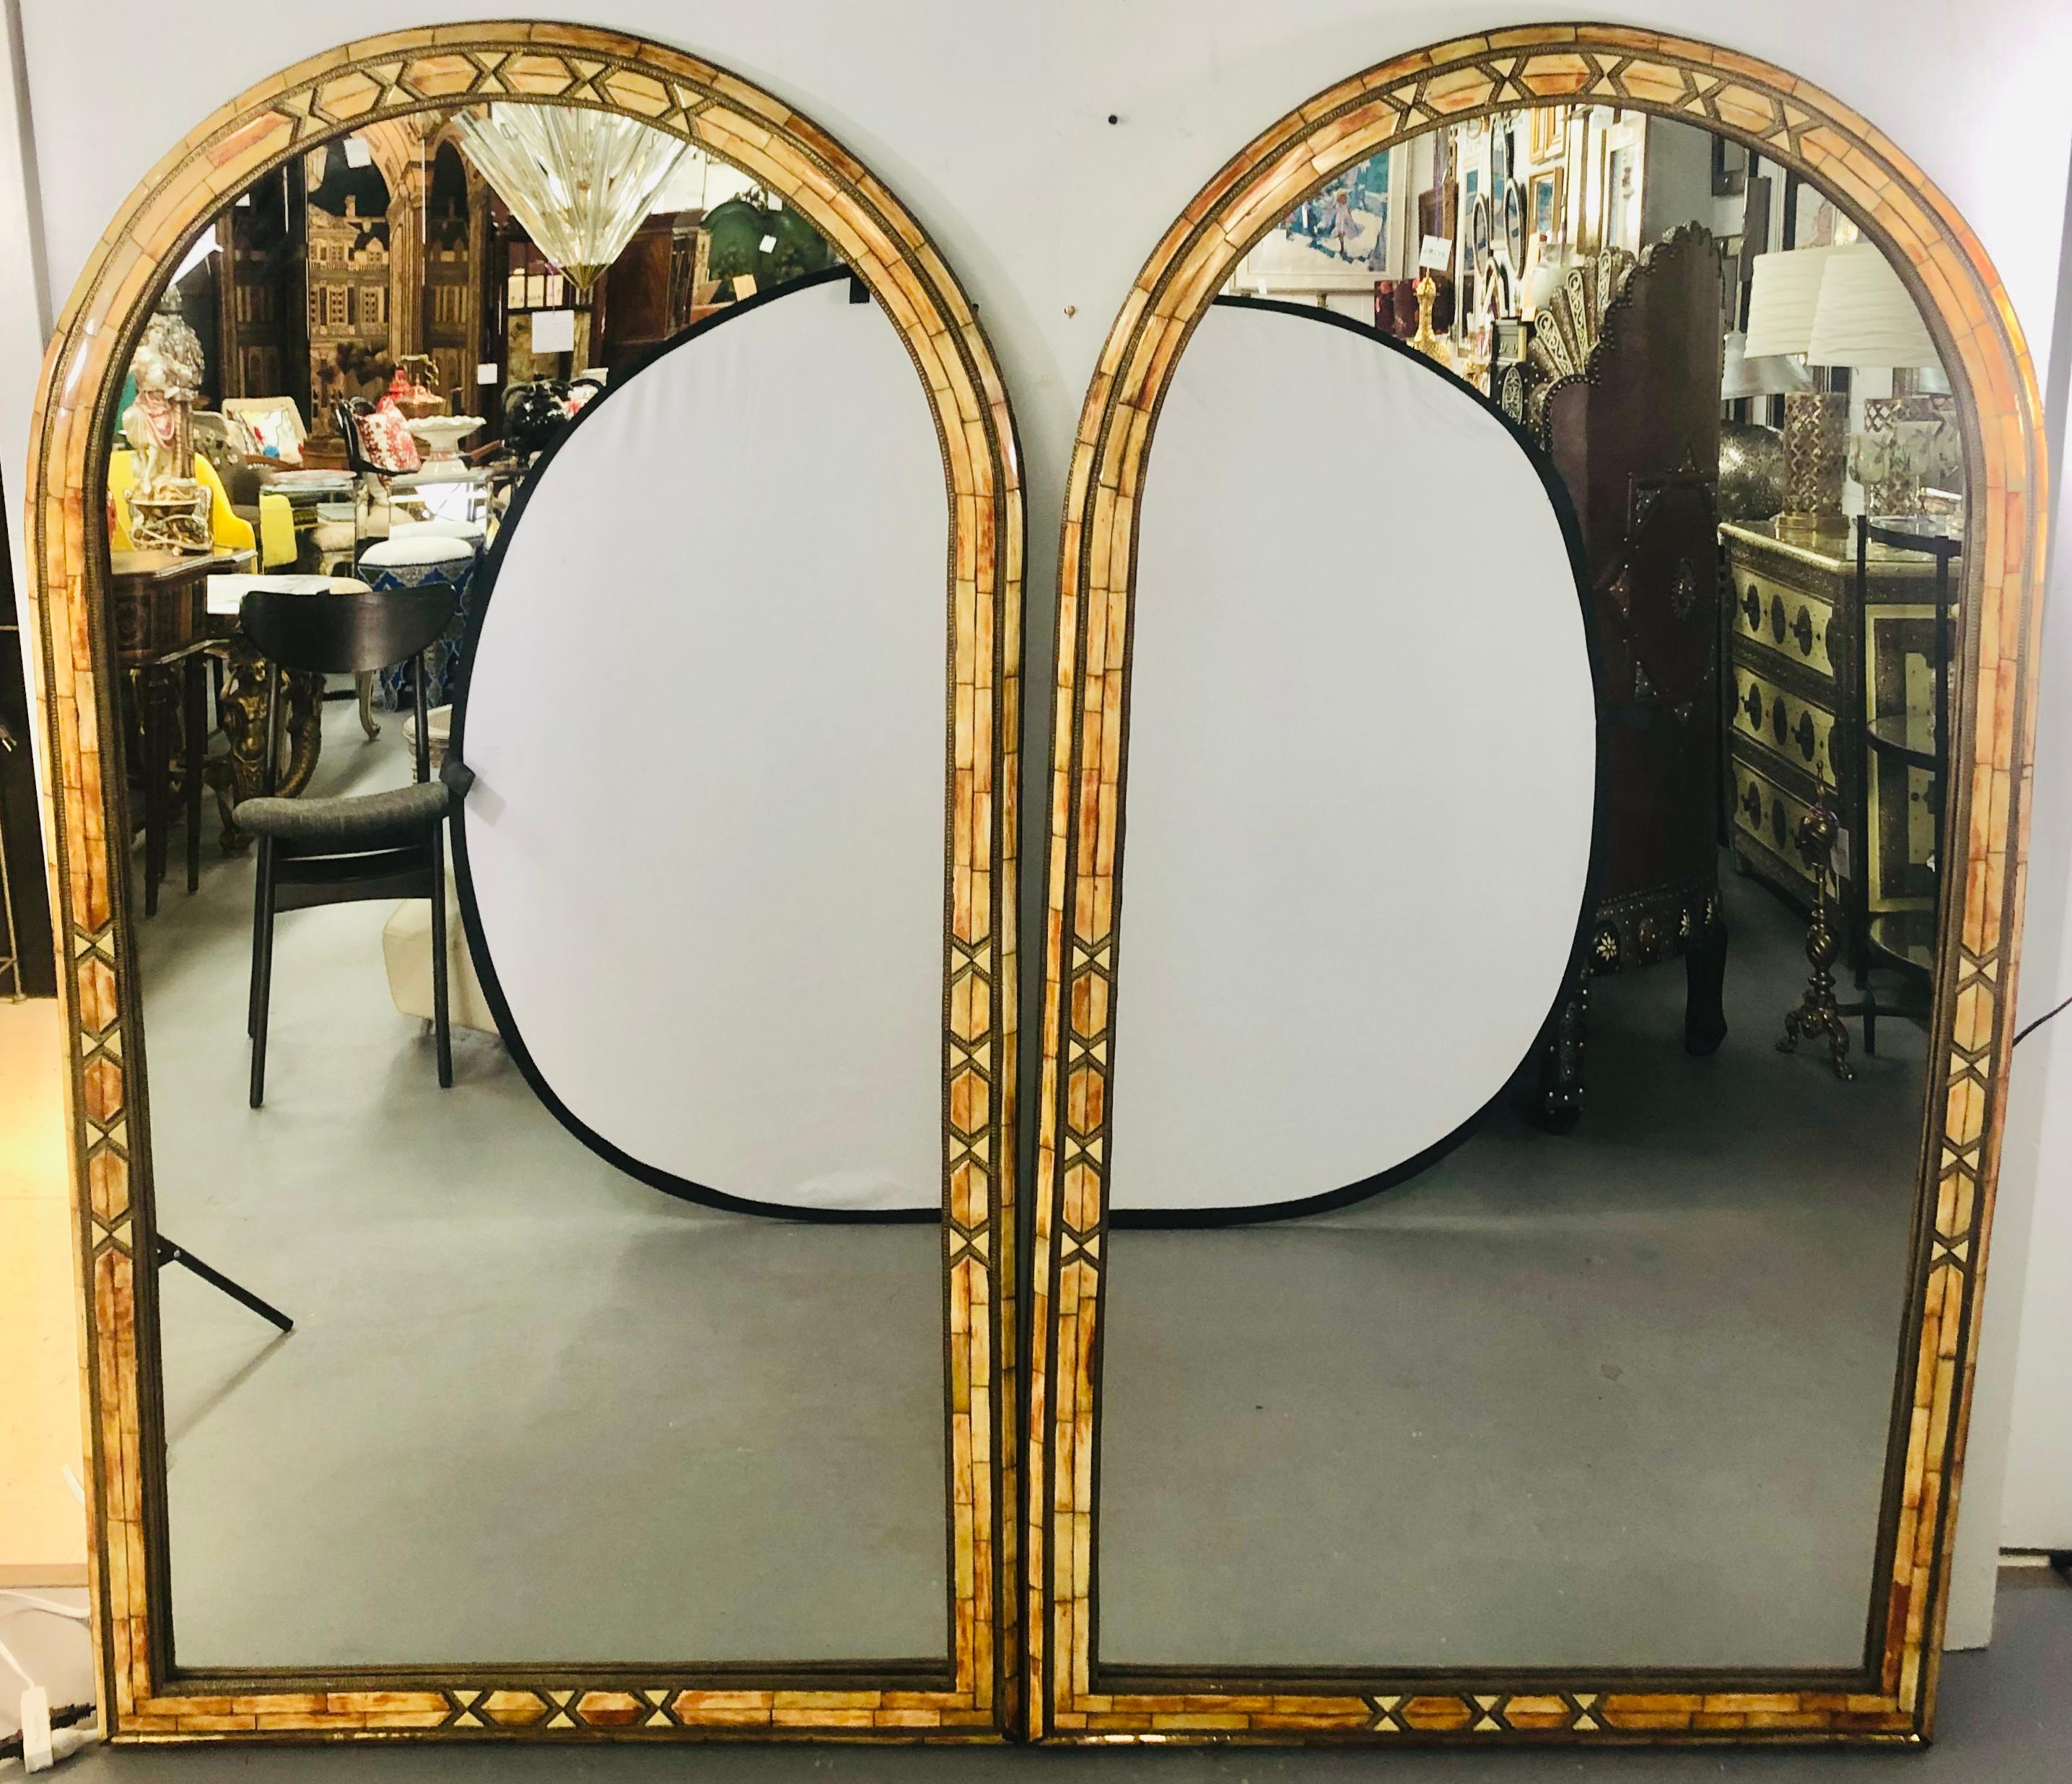 Wall console or pier mirror palatial Moroccan Hollywood Regency fashioned, pair
With generous pieces of orange camel bone set into a frame of brass, these uniquely constructed mirrors exude a muted, fiery glow and warm tones. The mirrors are